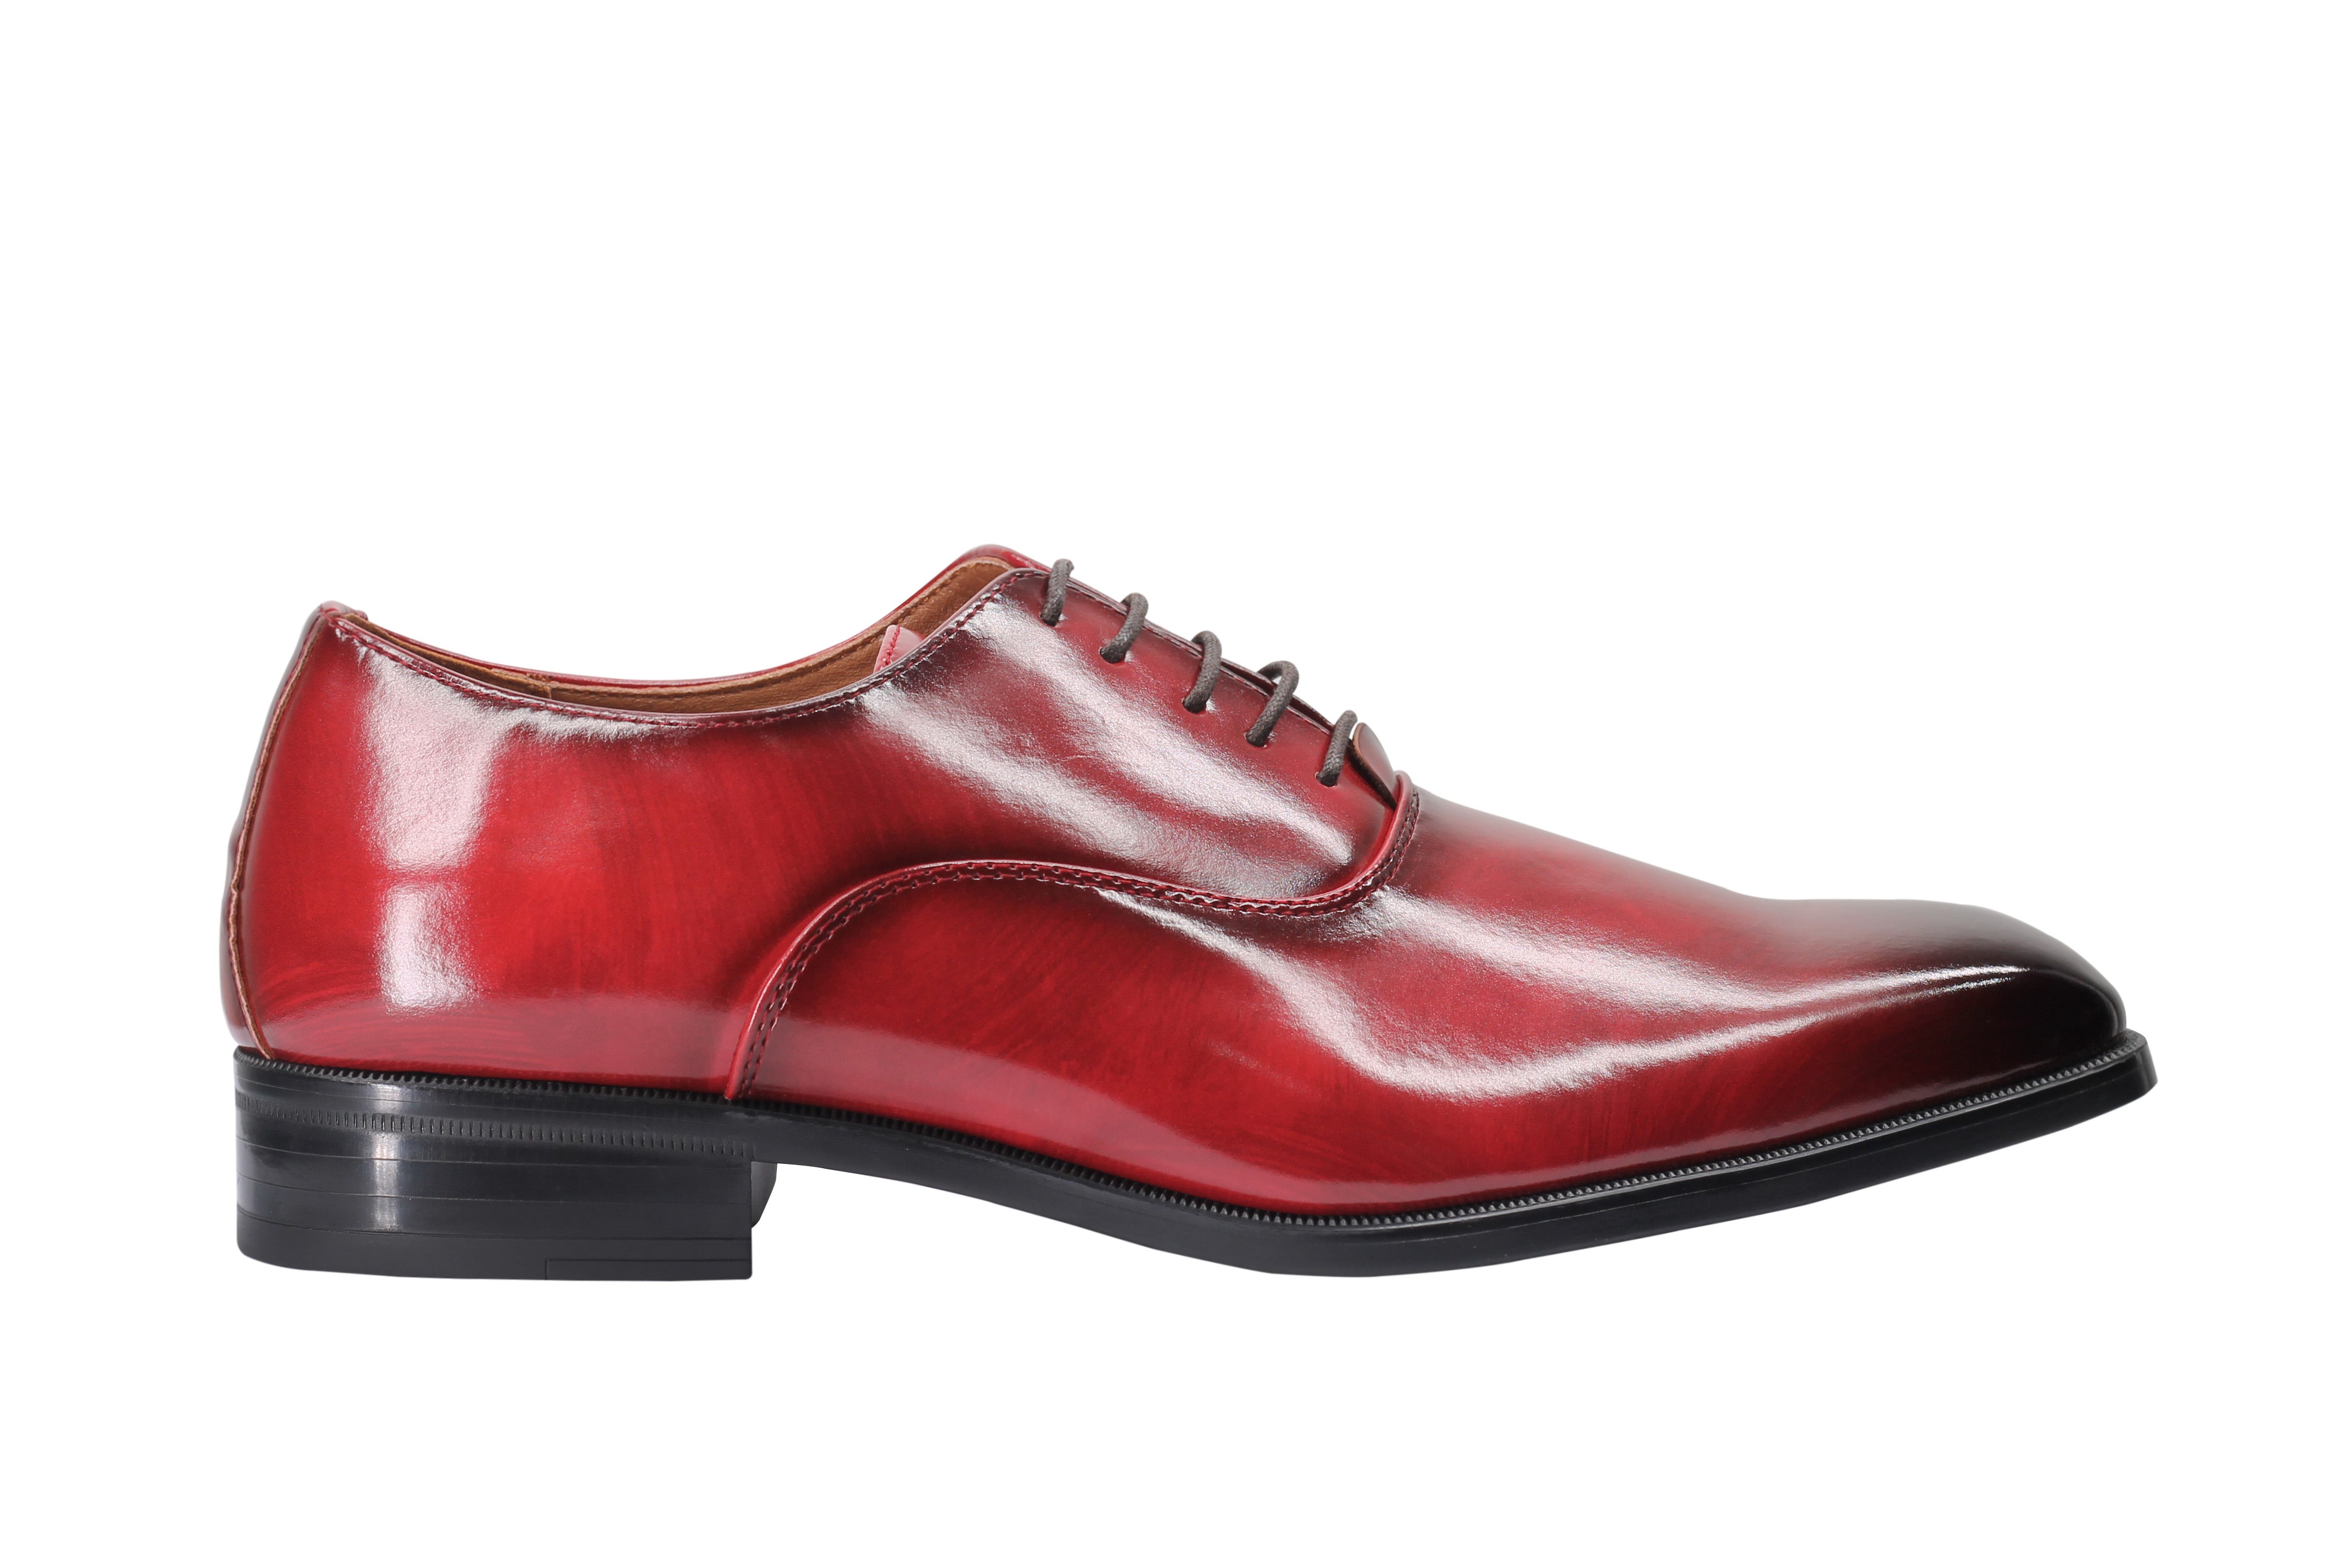 POLISHED OXFORD LACEUP SHOES